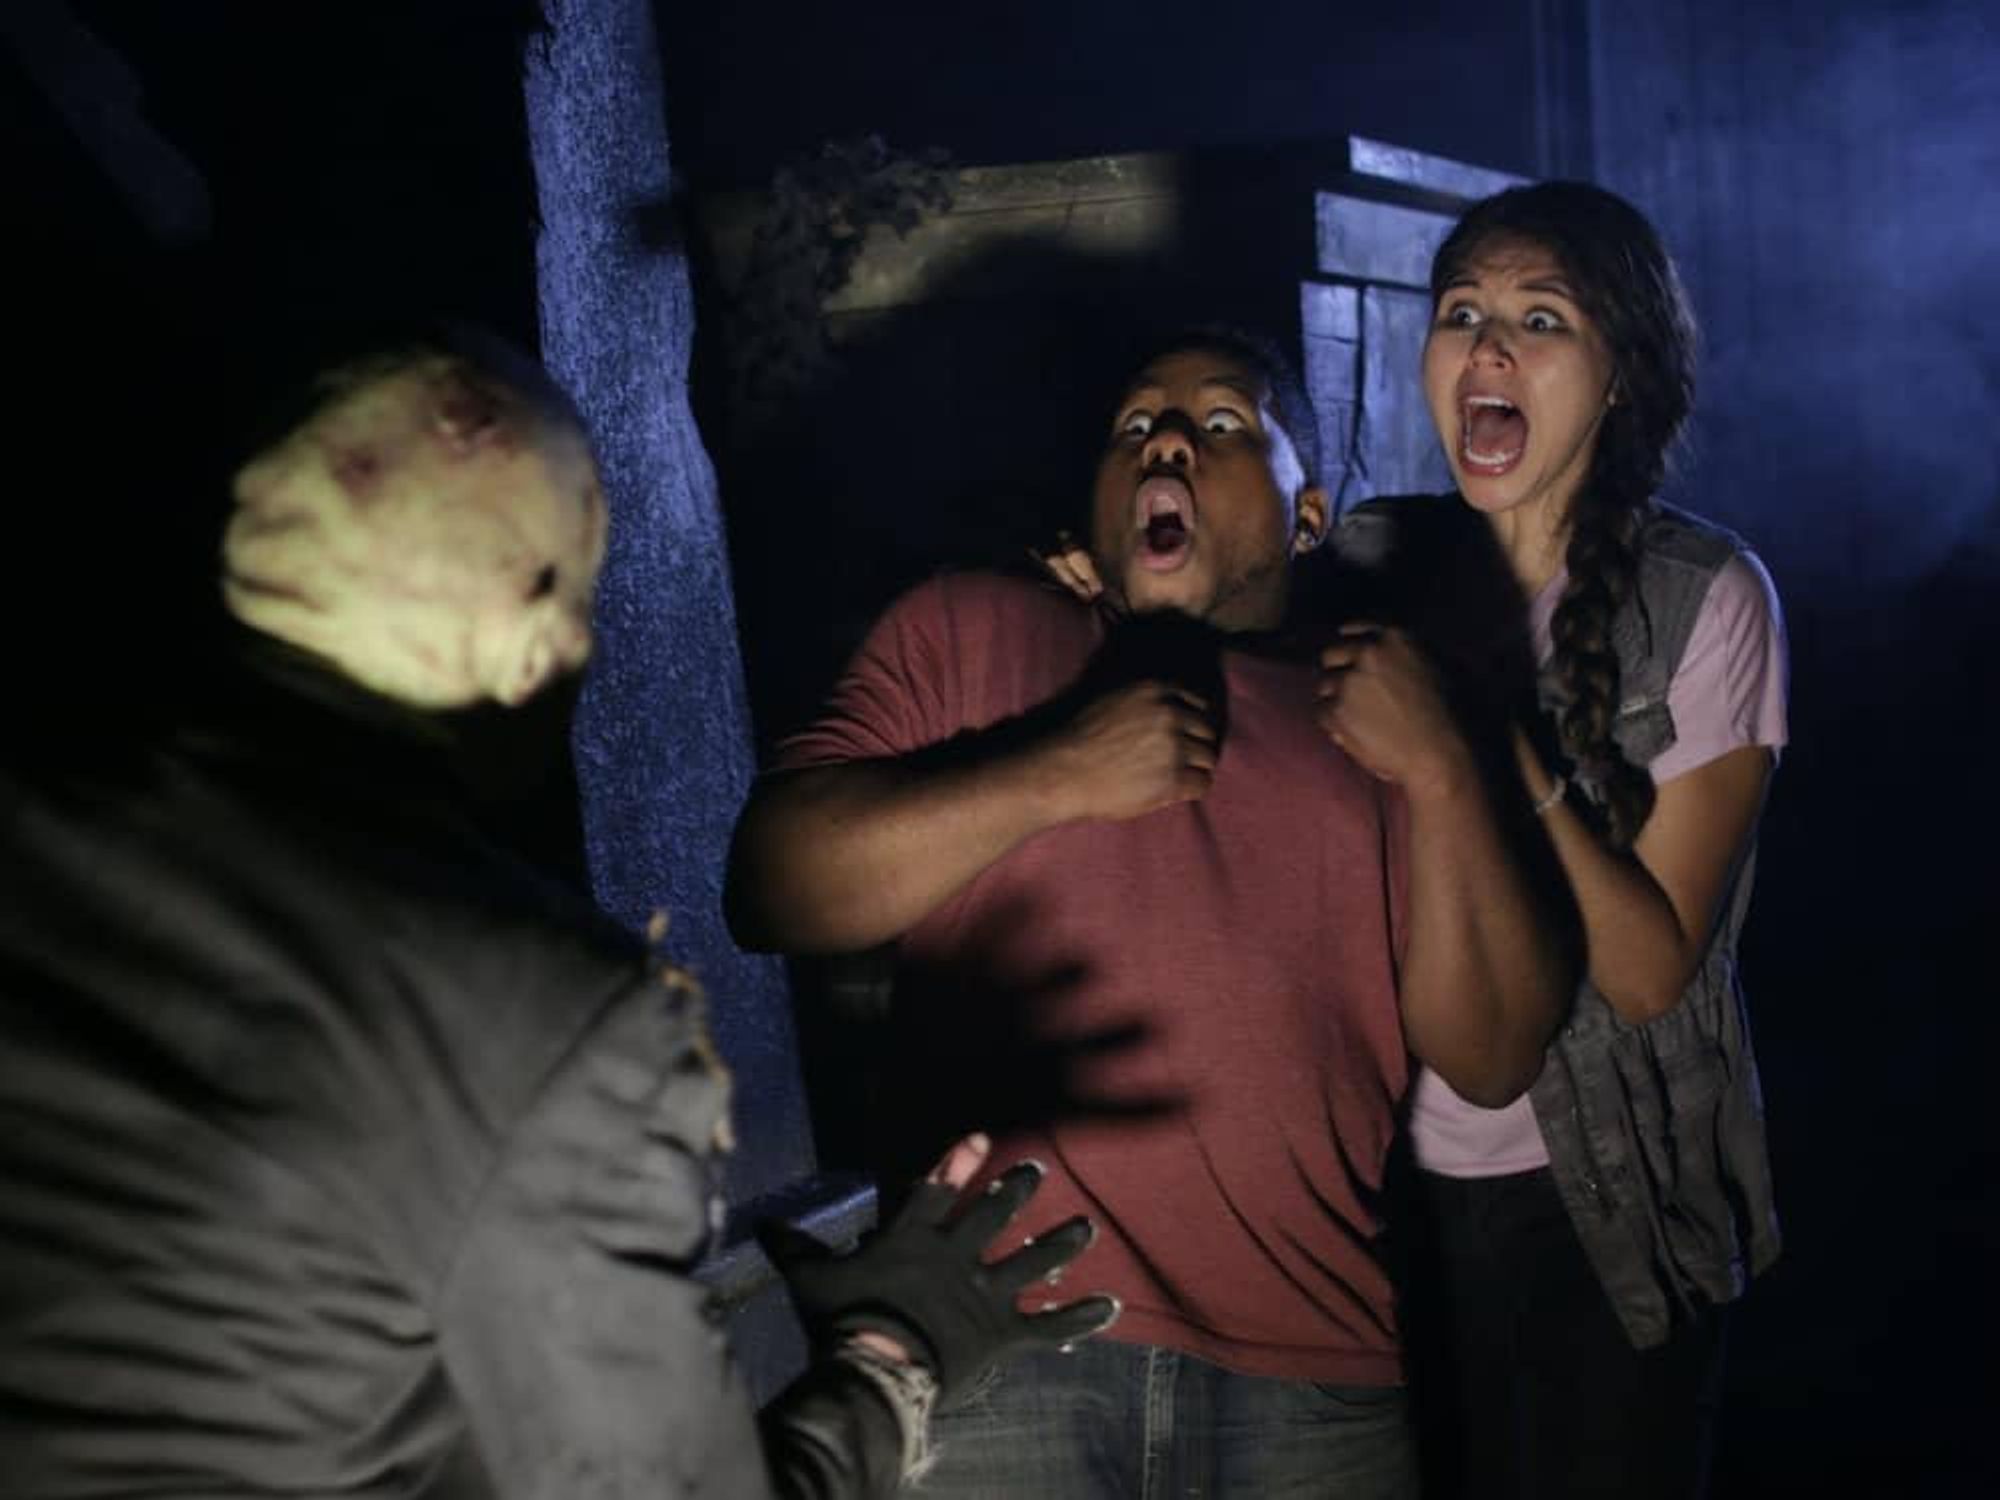 House of Torment haunted house